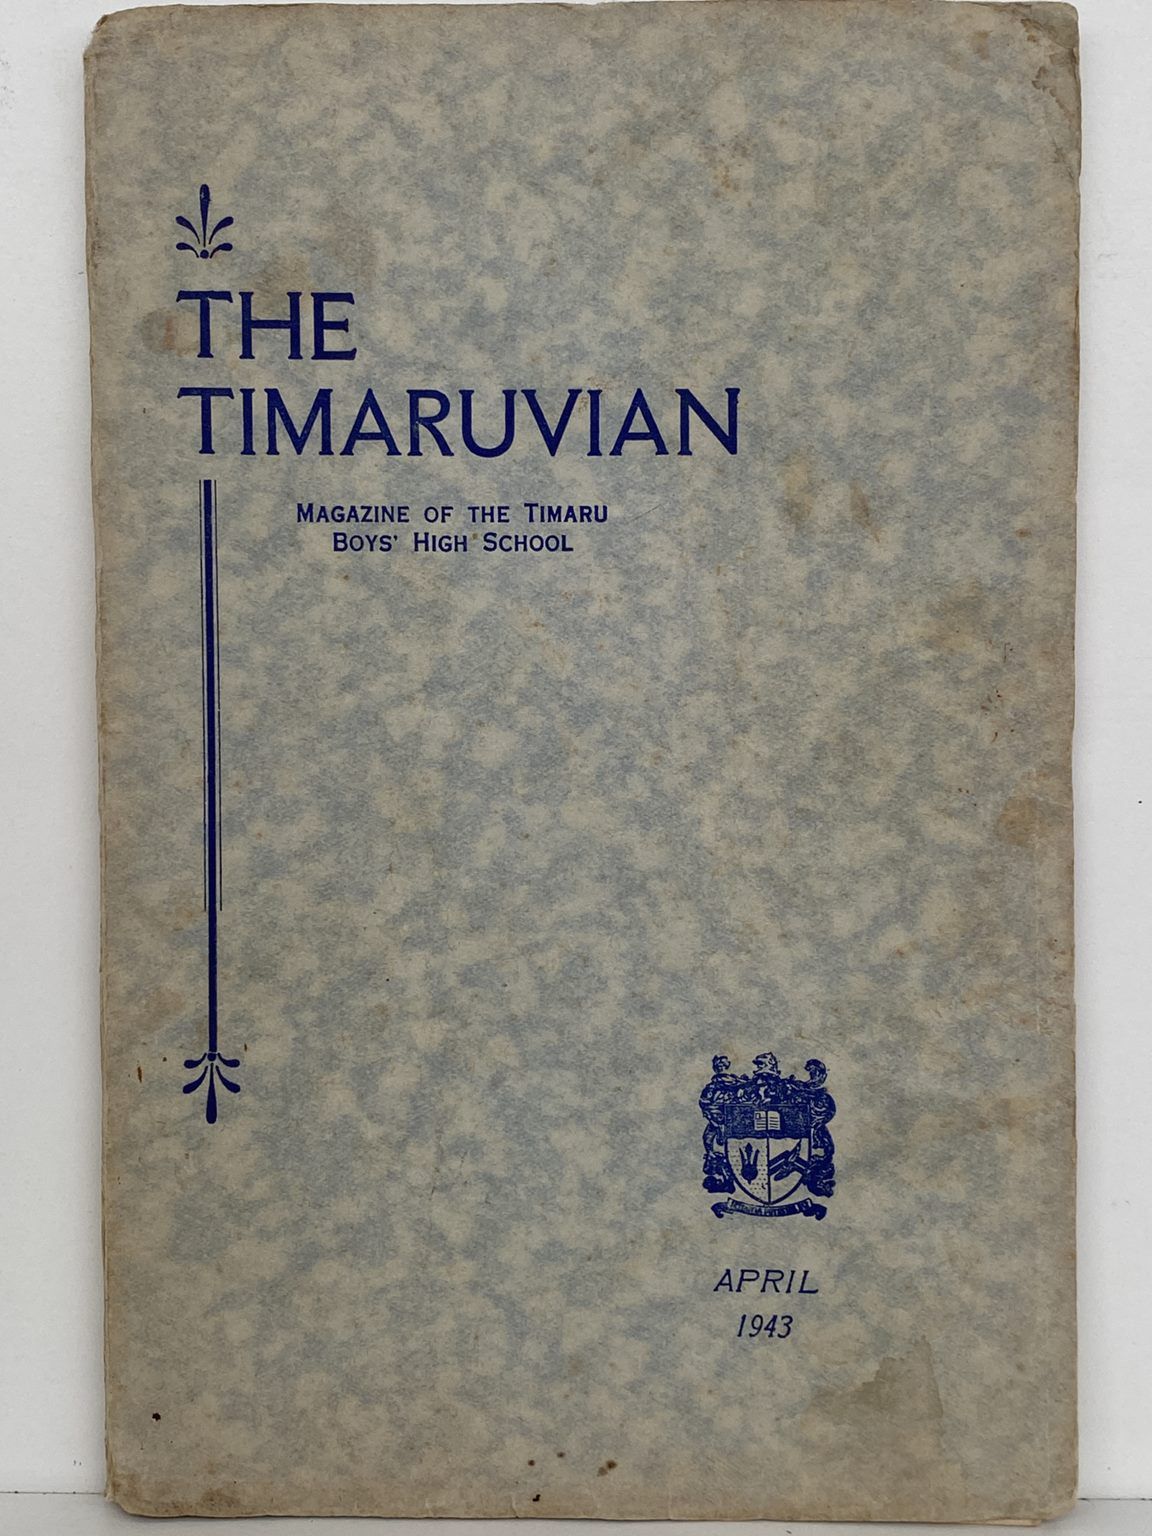 THE TIMARUVIAN: Magazine of the Timaru Boys' High School and its Old Boys' Association 1943